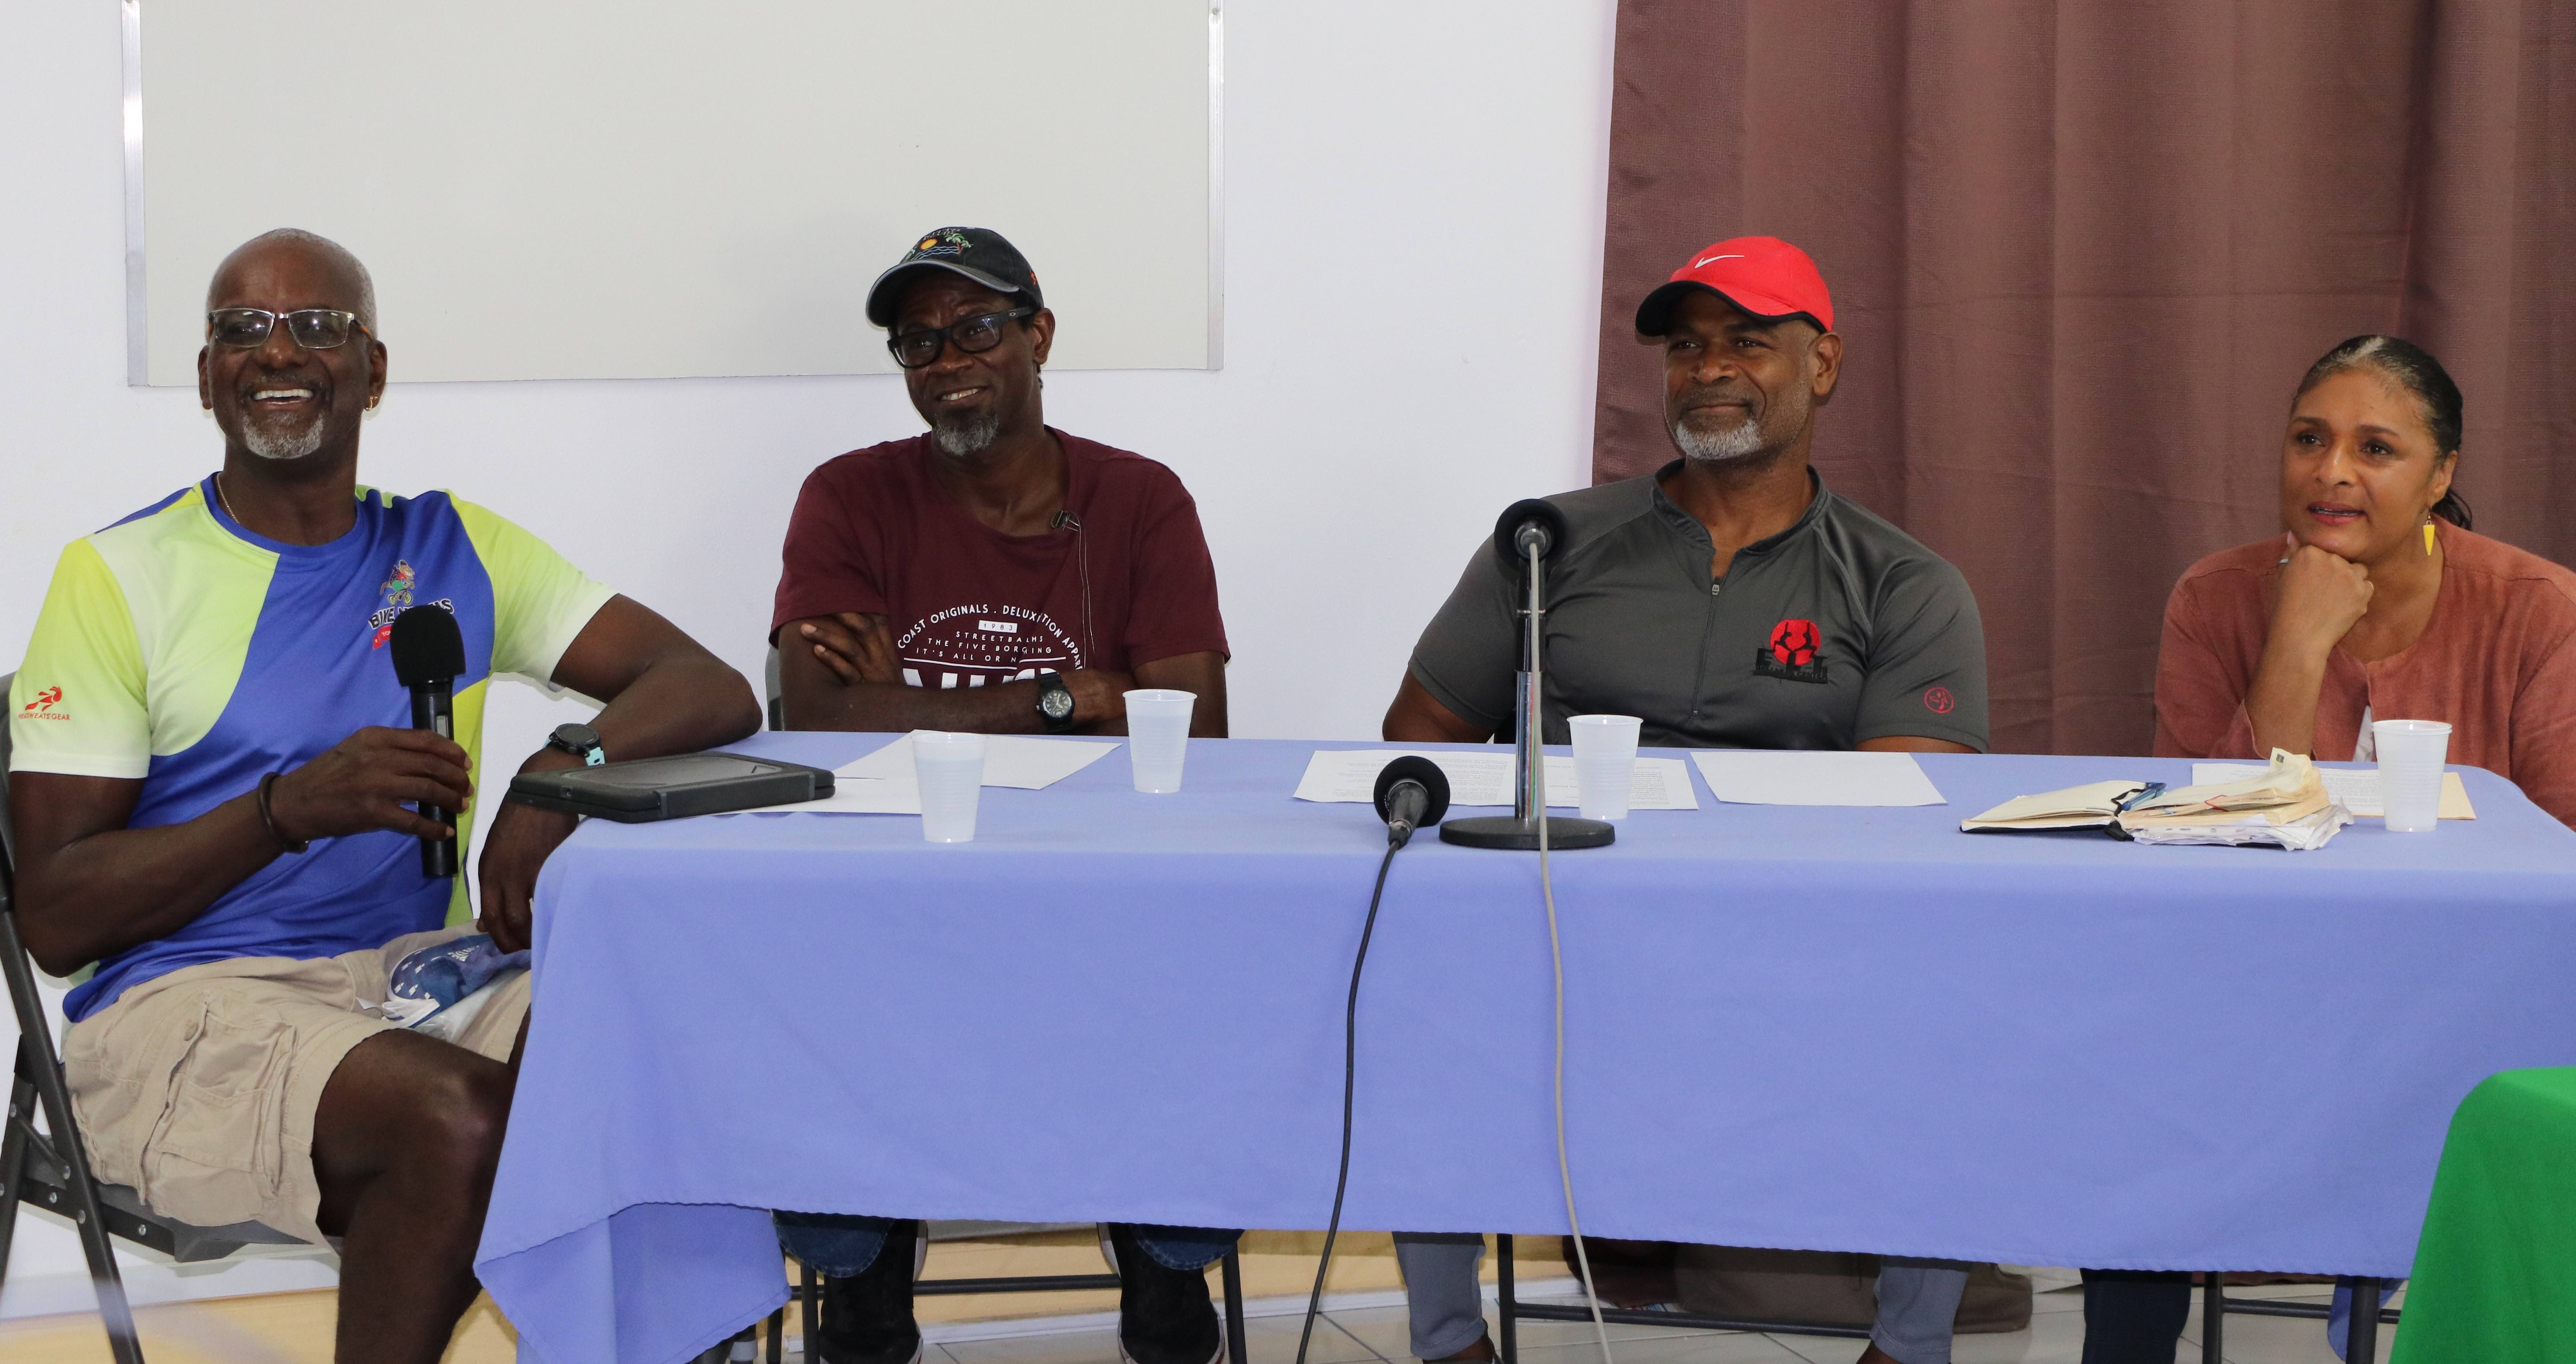 (l-r) Mr. Winston Crooke, Mr. Donford Wilkinson, Mr. David Walwyn, and Ms. Shelagh James, members of the organizing committee for the F.I.T. National Weight Loss Campaign and Nevis Chapter of SKN Moves Annual Bike Relay on November 15, 2020, during a press conference at the Gender Affairs Department conference room in Charlestown on October 26, 2020